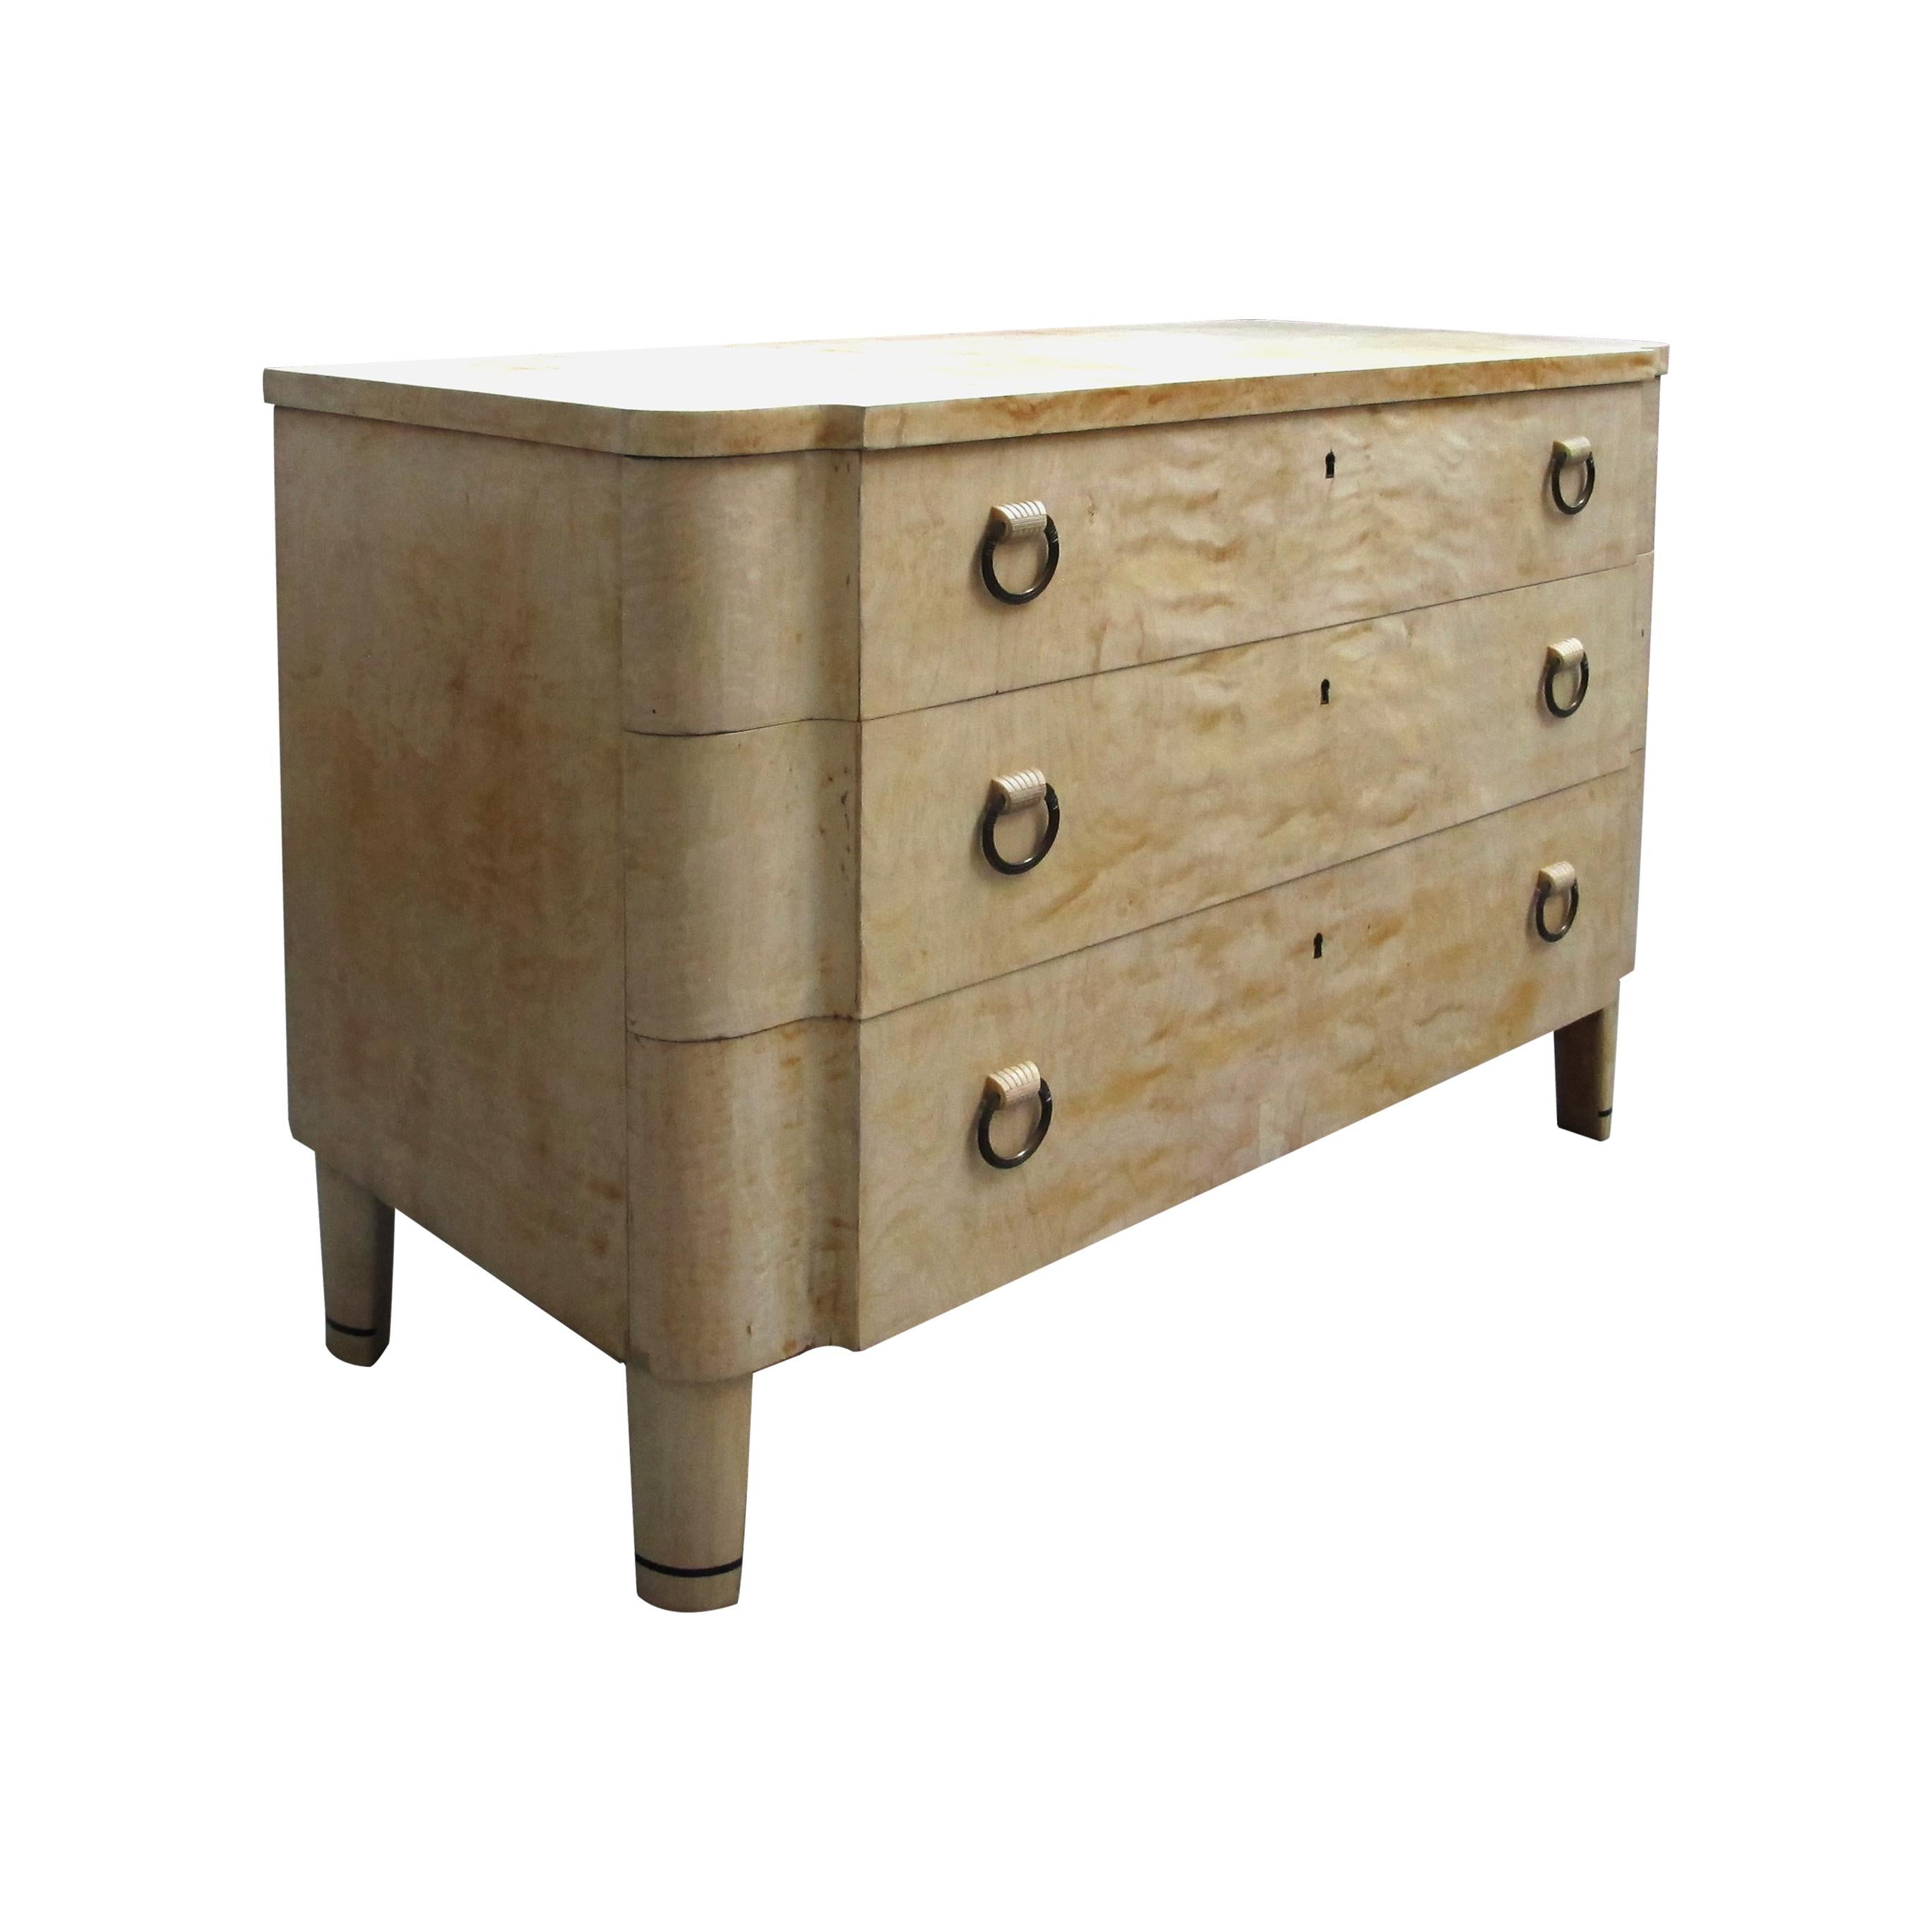 An elegant Scandinavian Art Deco chest of drawers with honeycomb Birch veneers, circa 1920s. The three equal size drawers are beautifully curved on the edges and all operated by the same key. Each drawer boasts its original brass handles which are